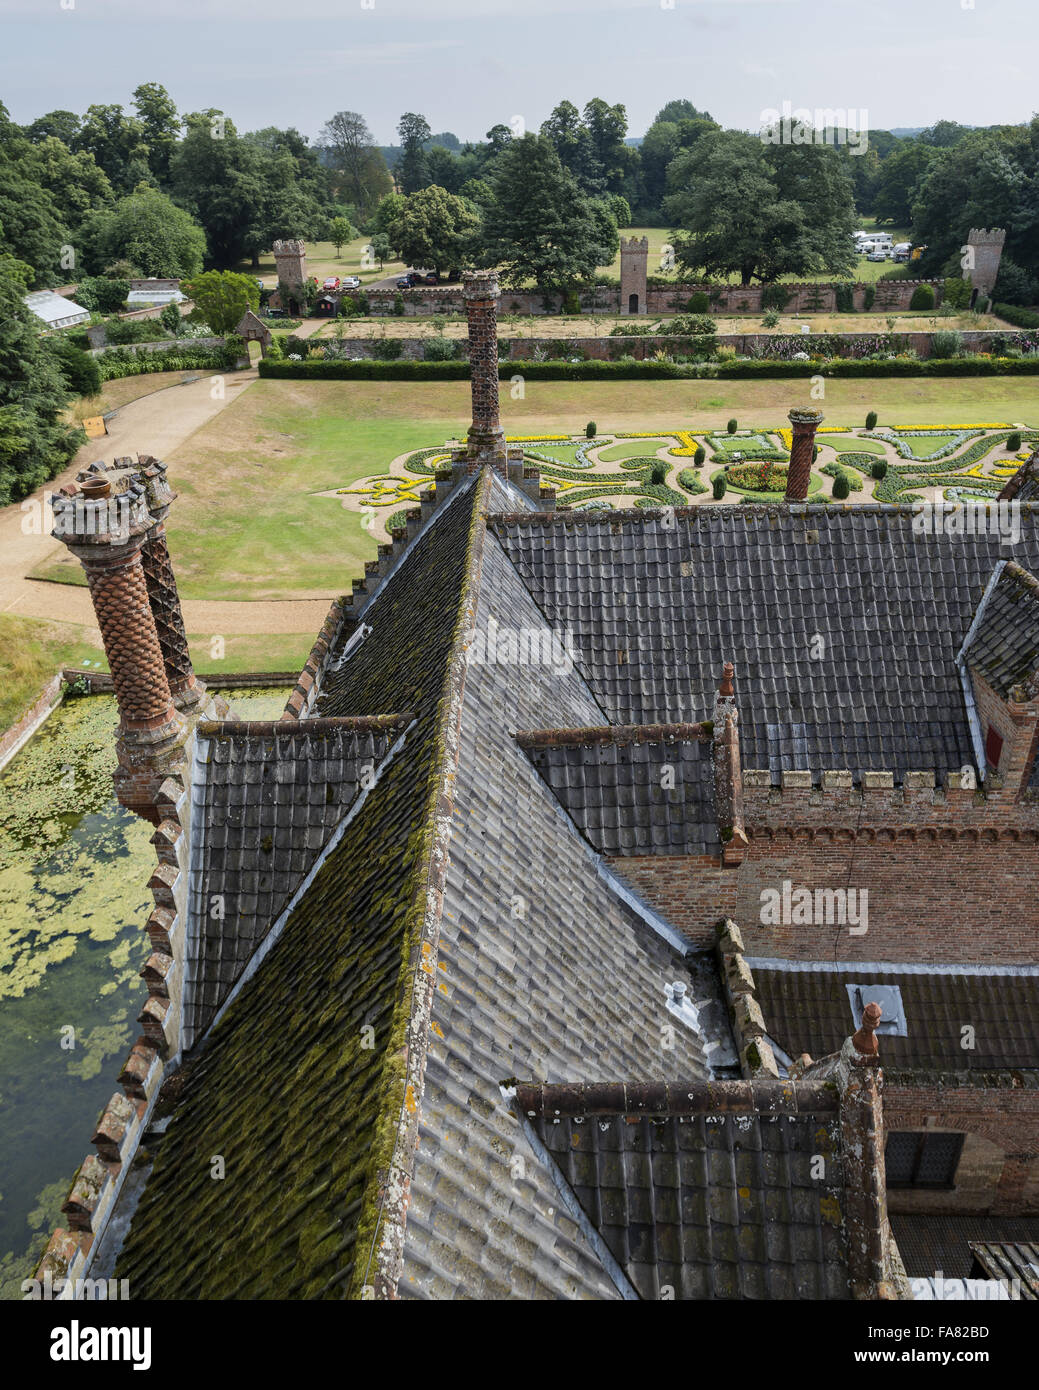 View of the rooftops, moat and gardens of Oxburgh Hall, Norfolk, from the Gatehouse Tower. Stock Photo